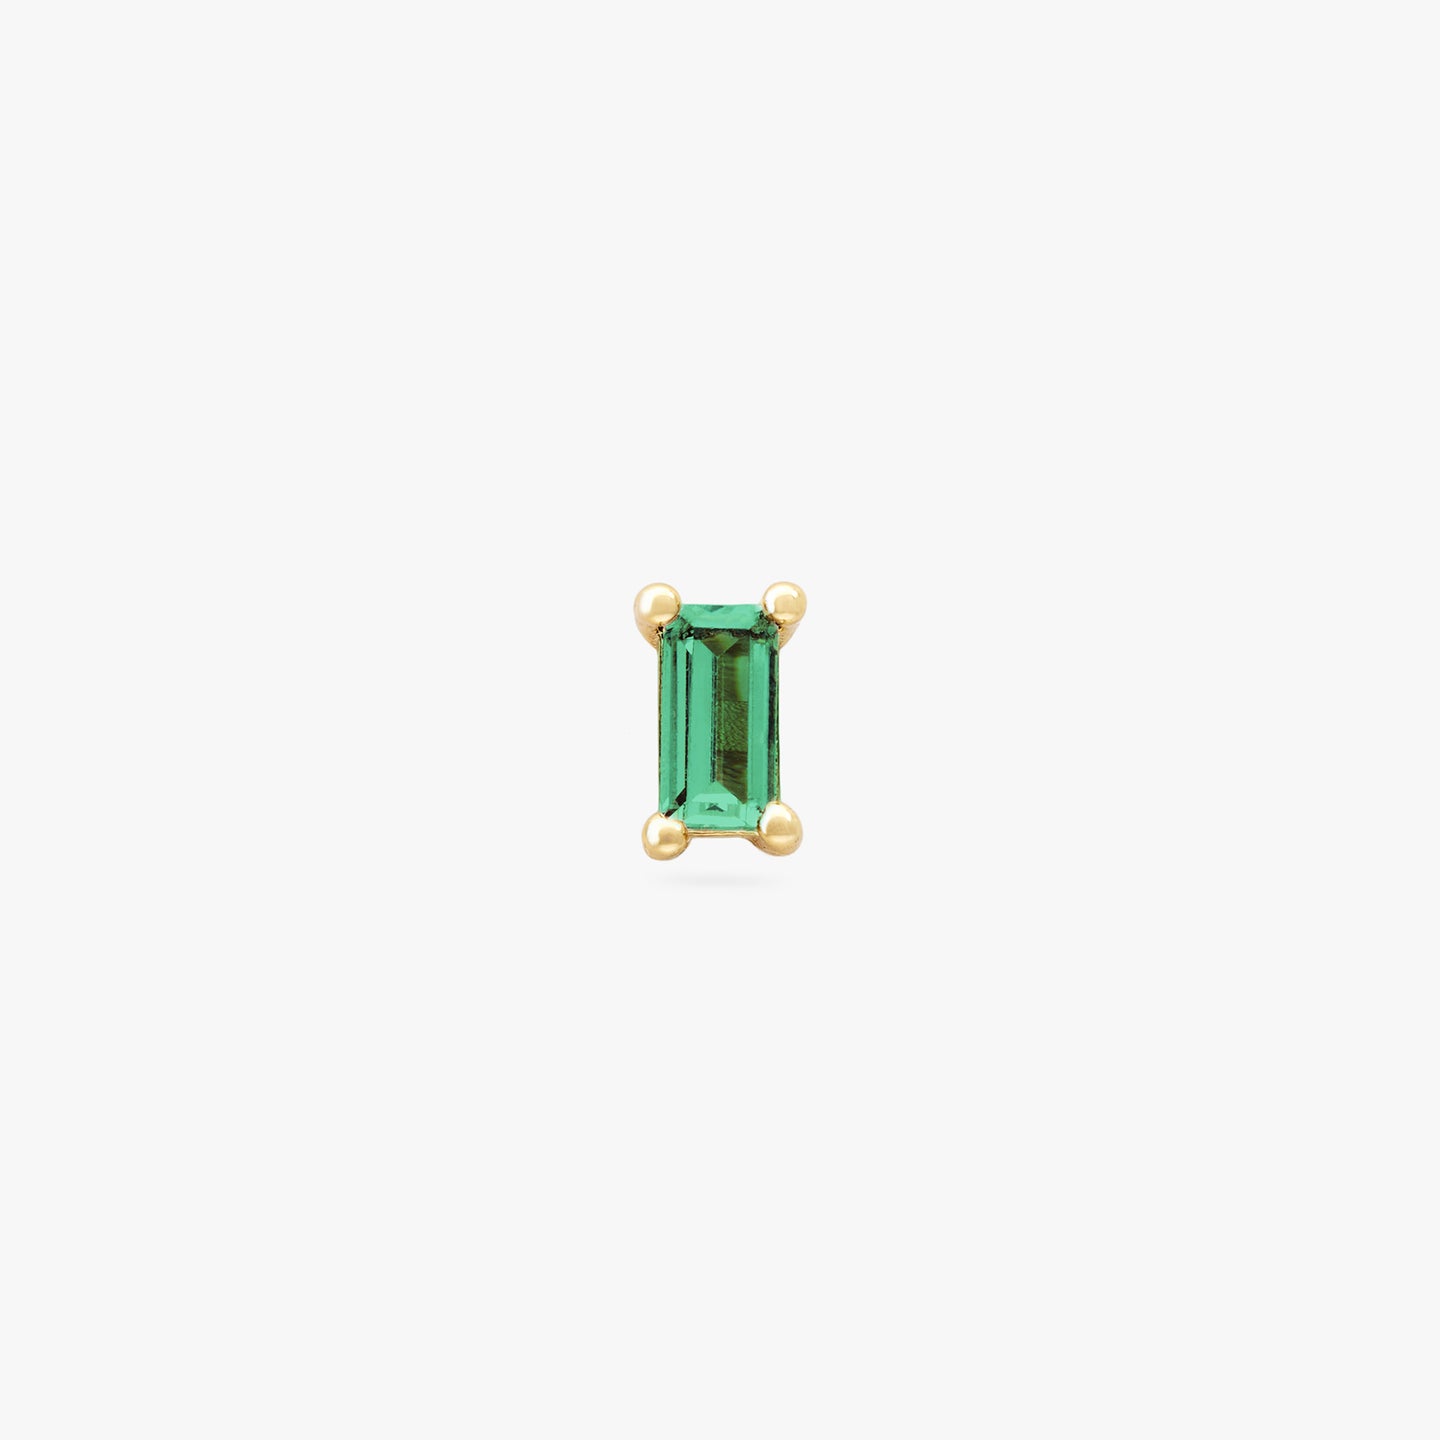 This is a gold baguette stud with a green CZ gem color:null|gold/green